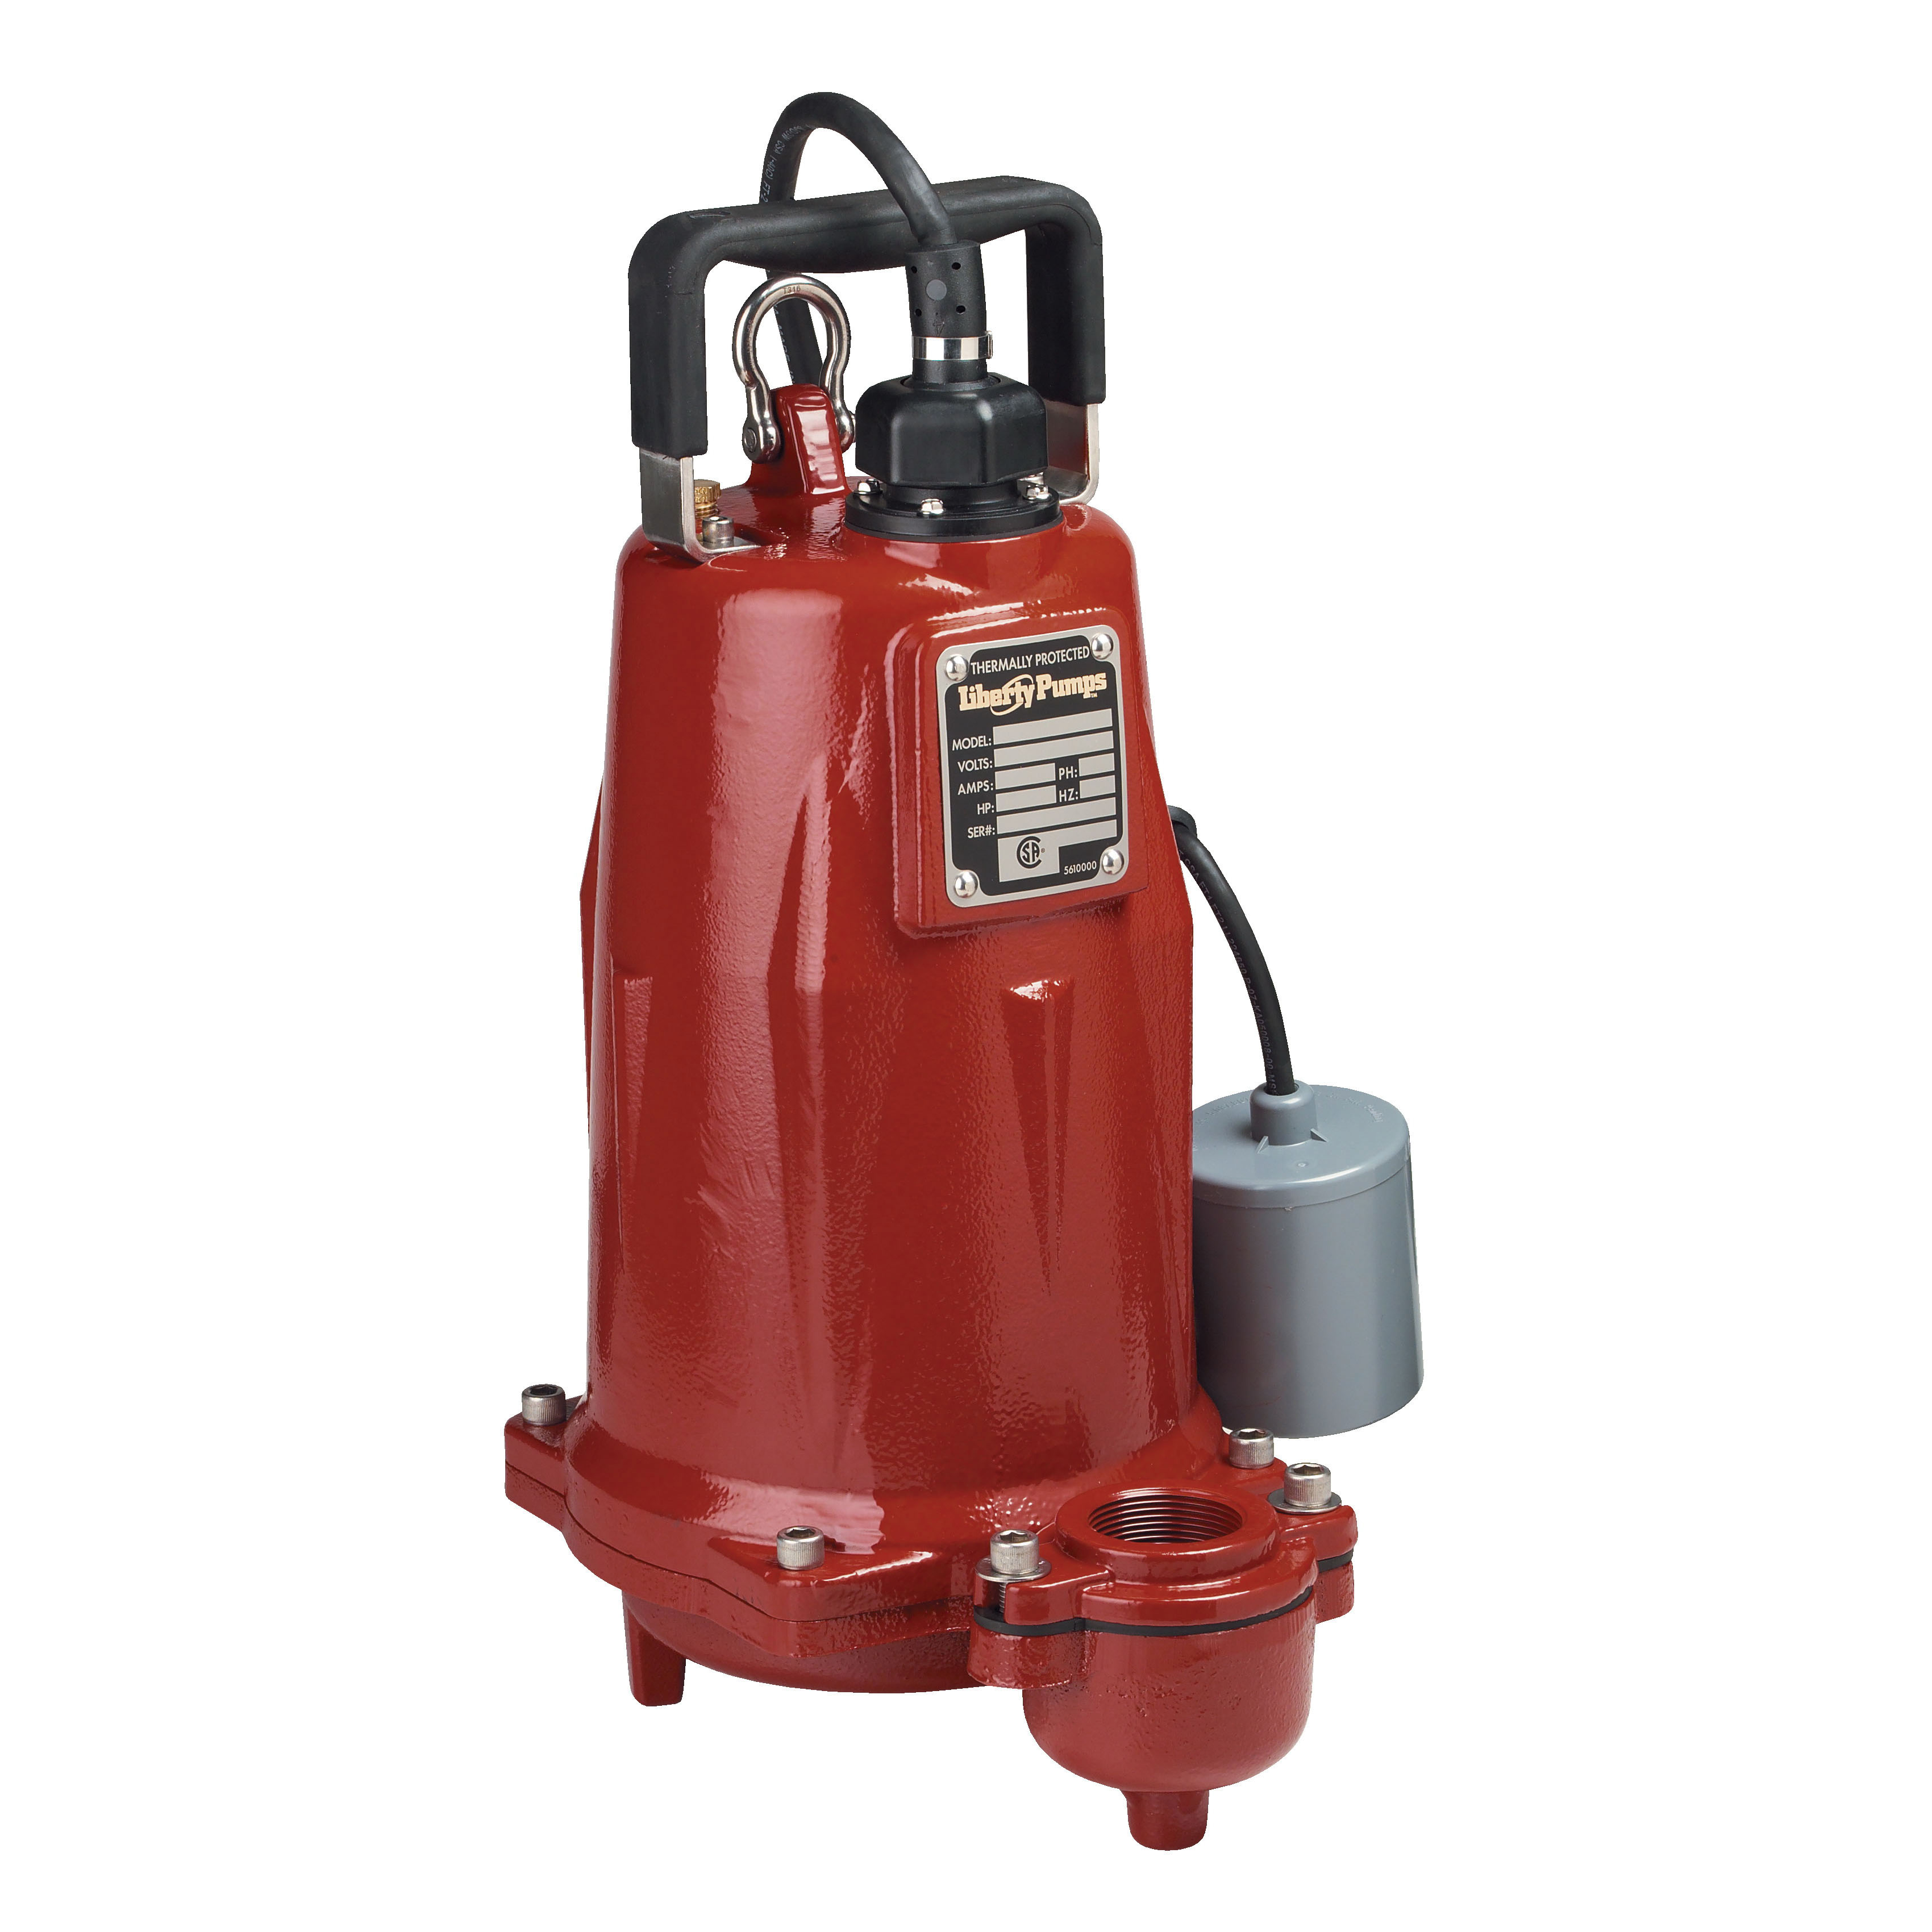 Liberty Pumps® FL102M-2 FL100, 107 gpm Max Flow, 15 ft Rated Head, Non-Automatic, 90 ft Max Head, 208 to 230 VAC, 1 ph Phase